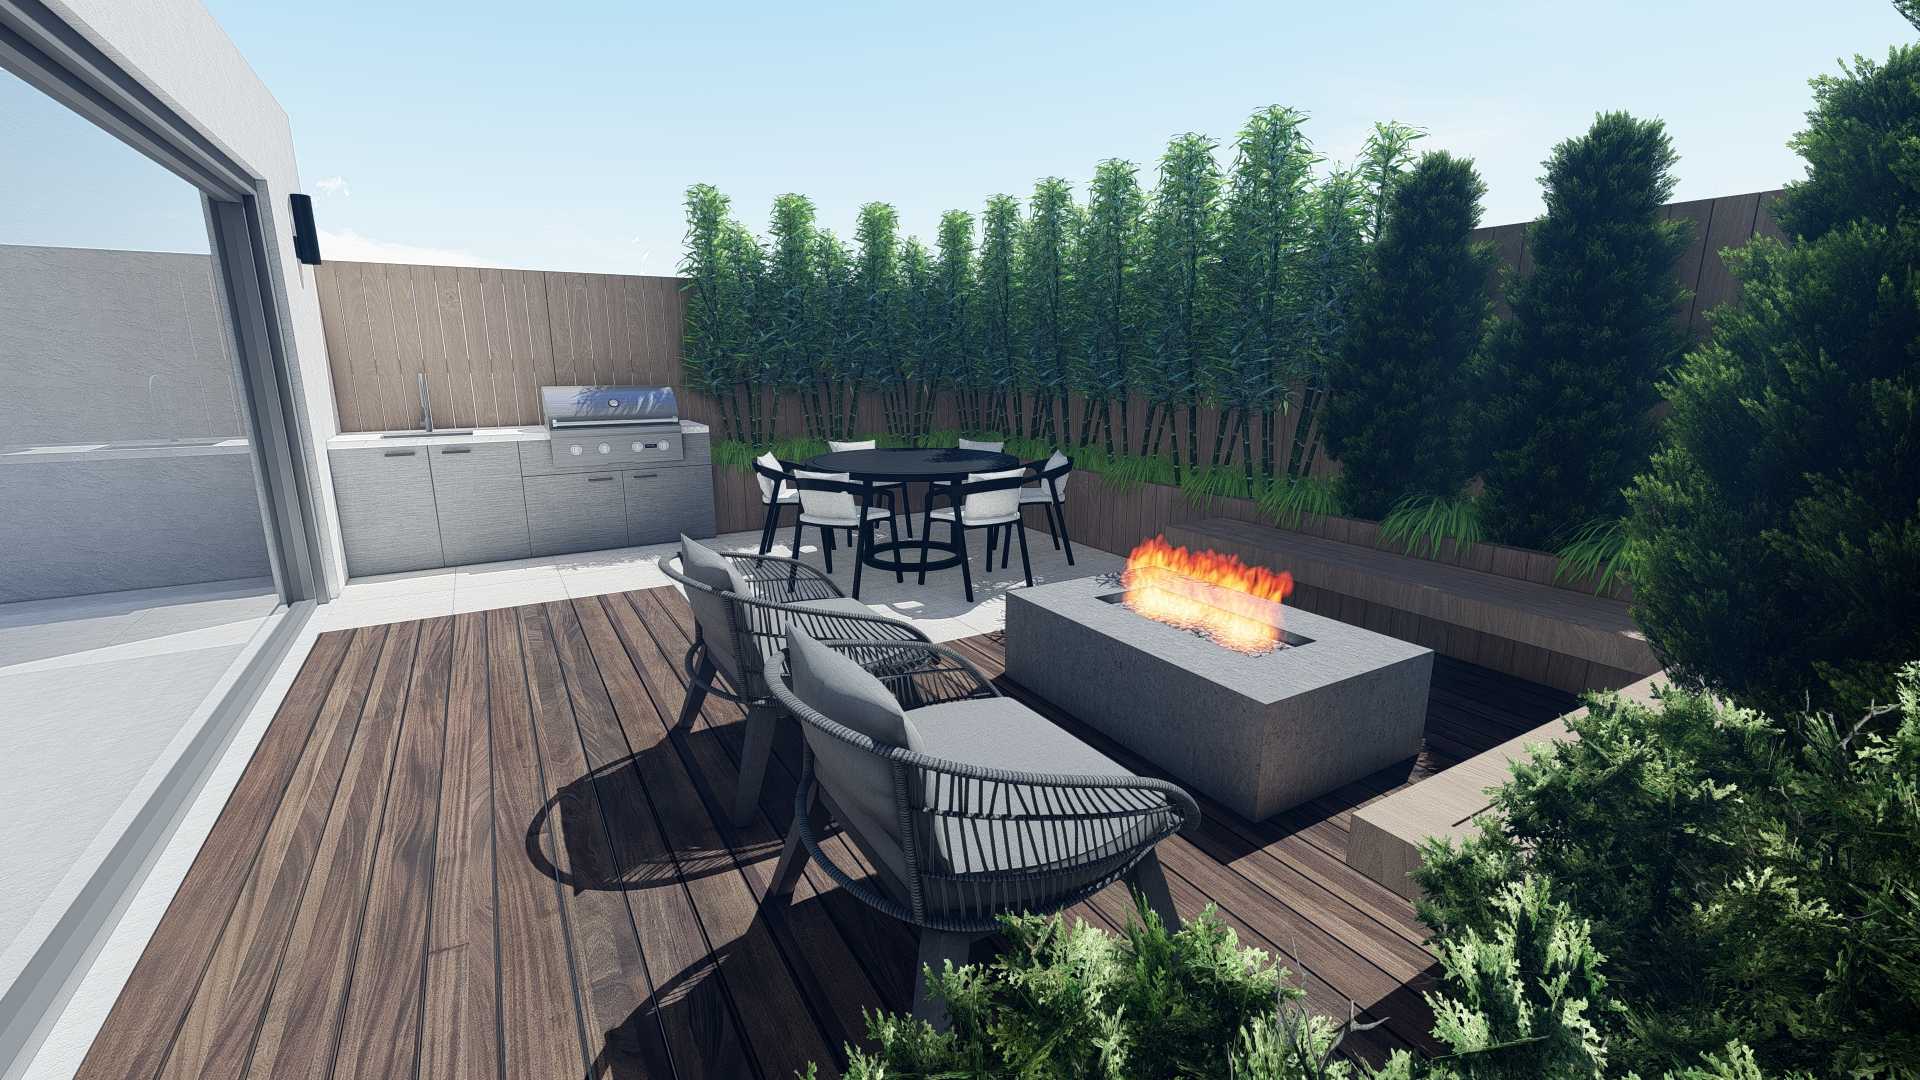 Lounge chairs, and fire pit